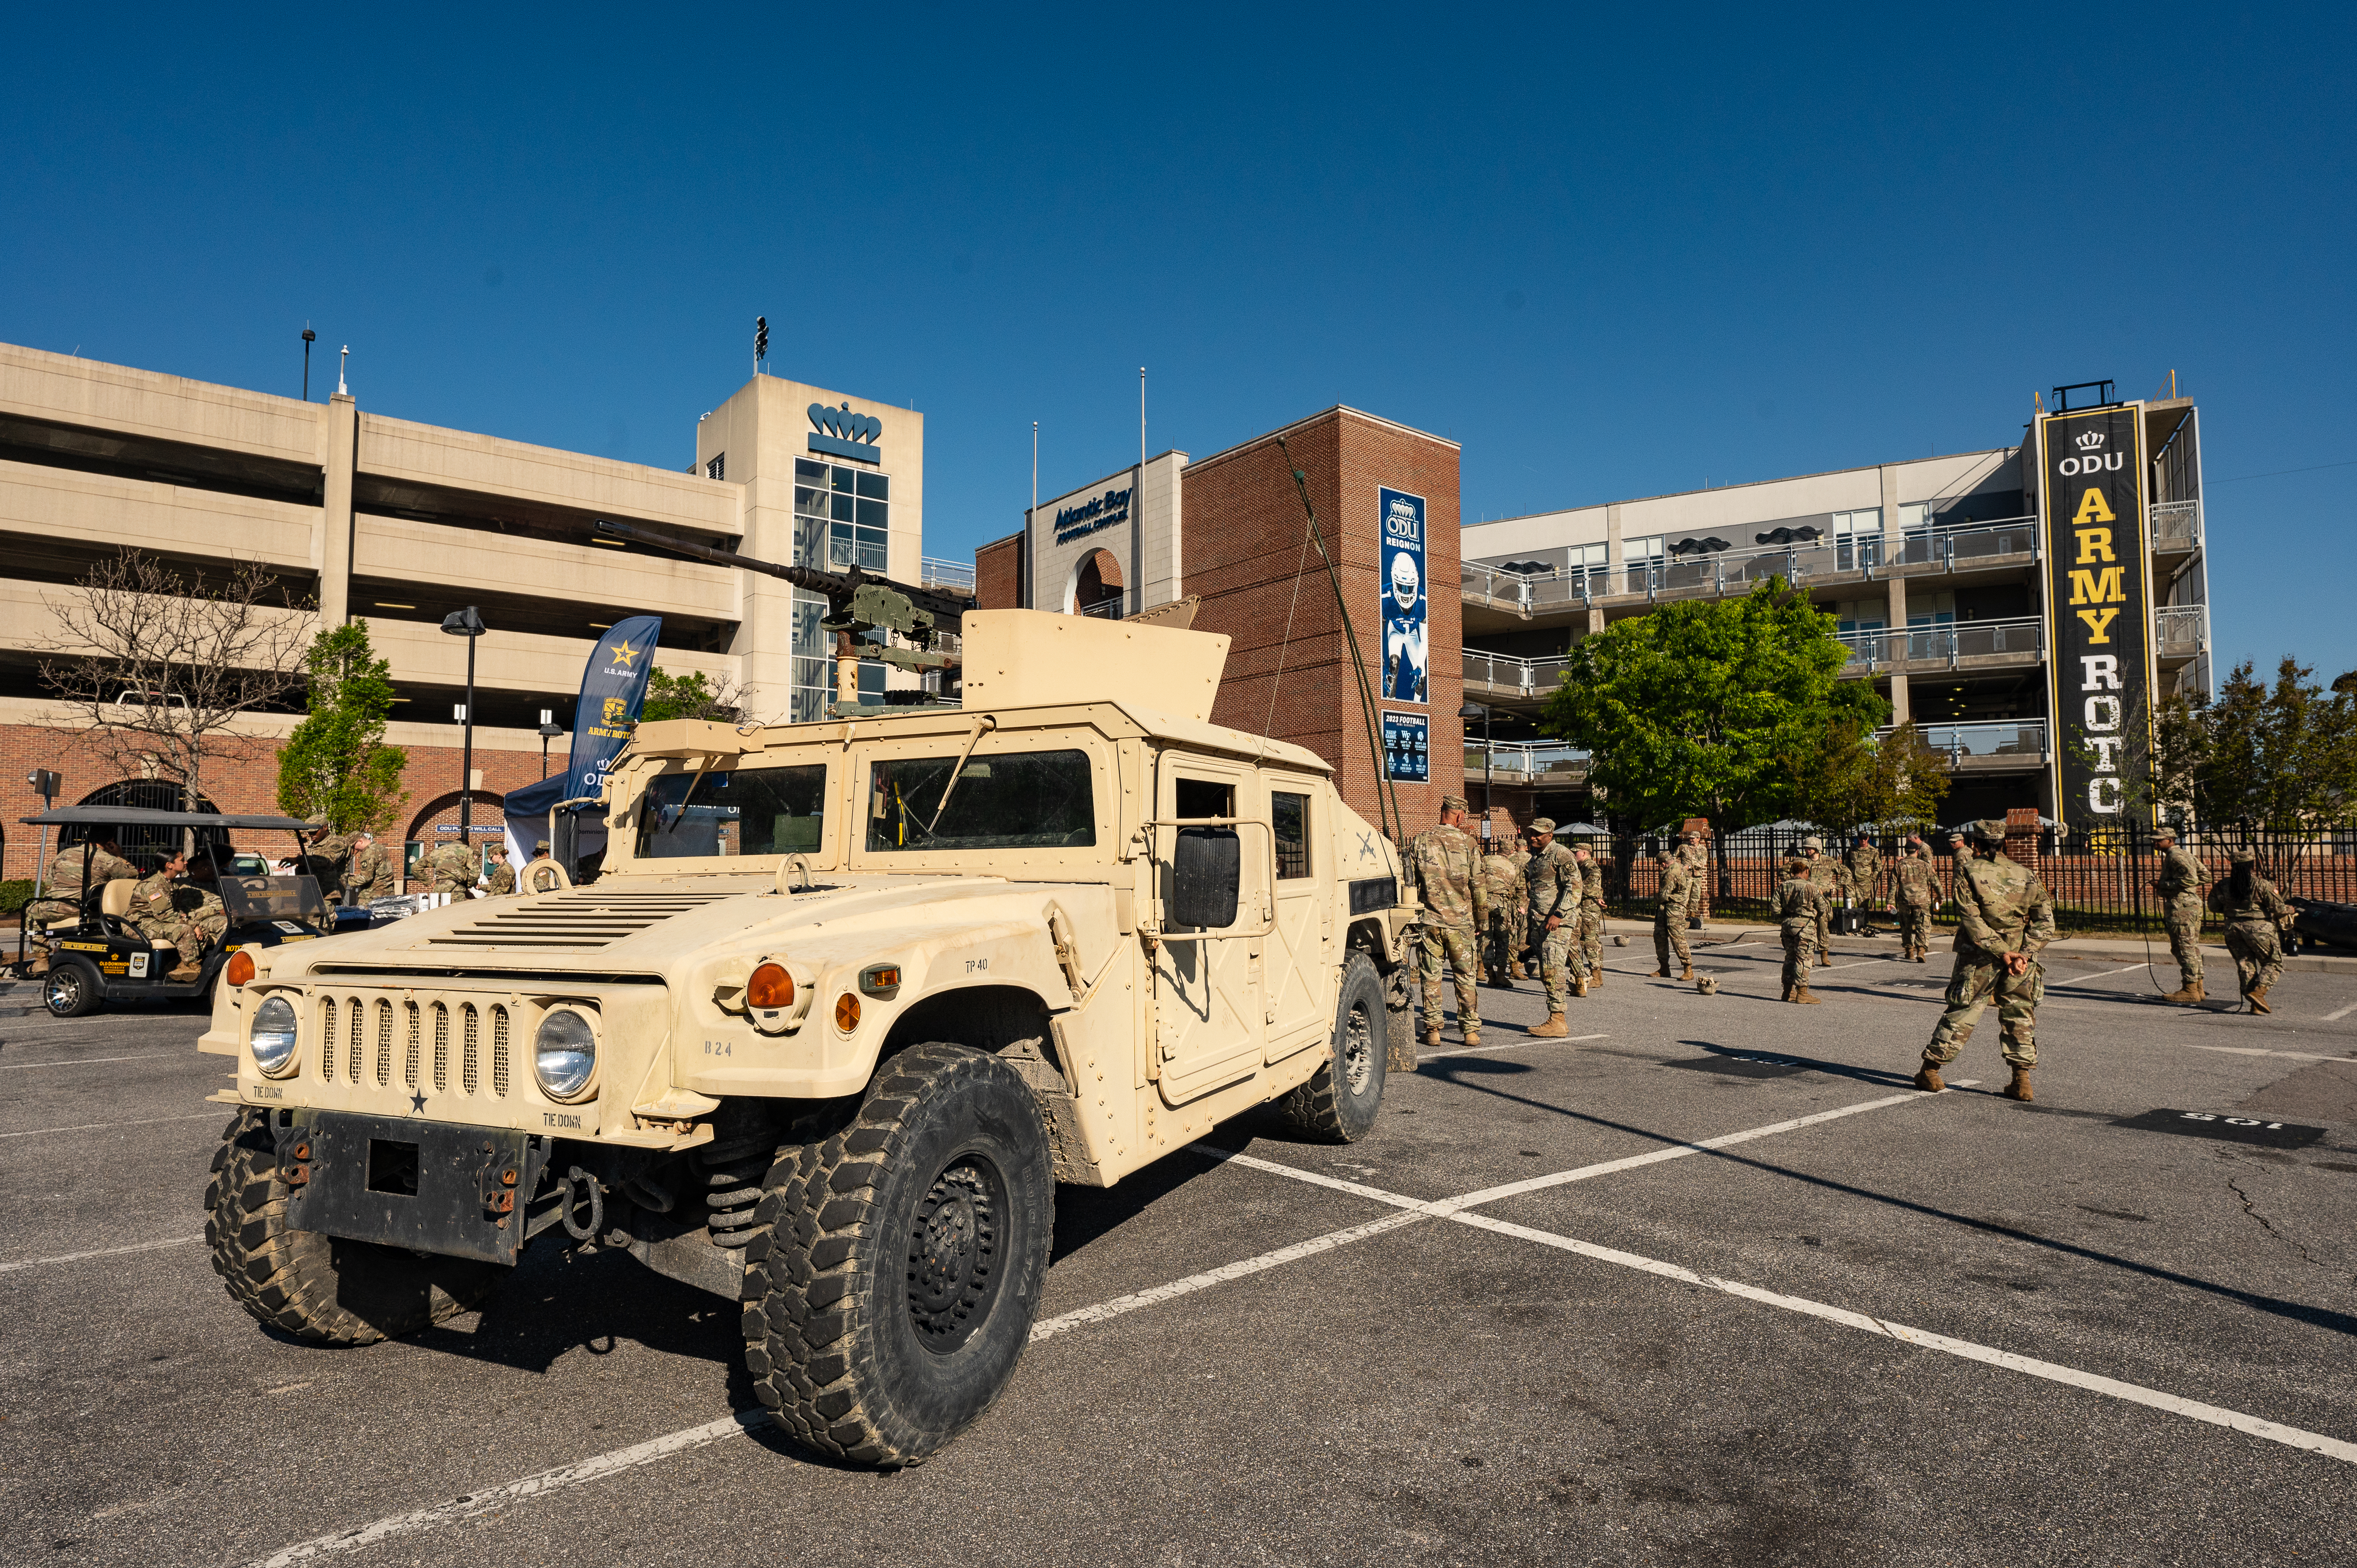 Army ROTC set up in ODU parking lot